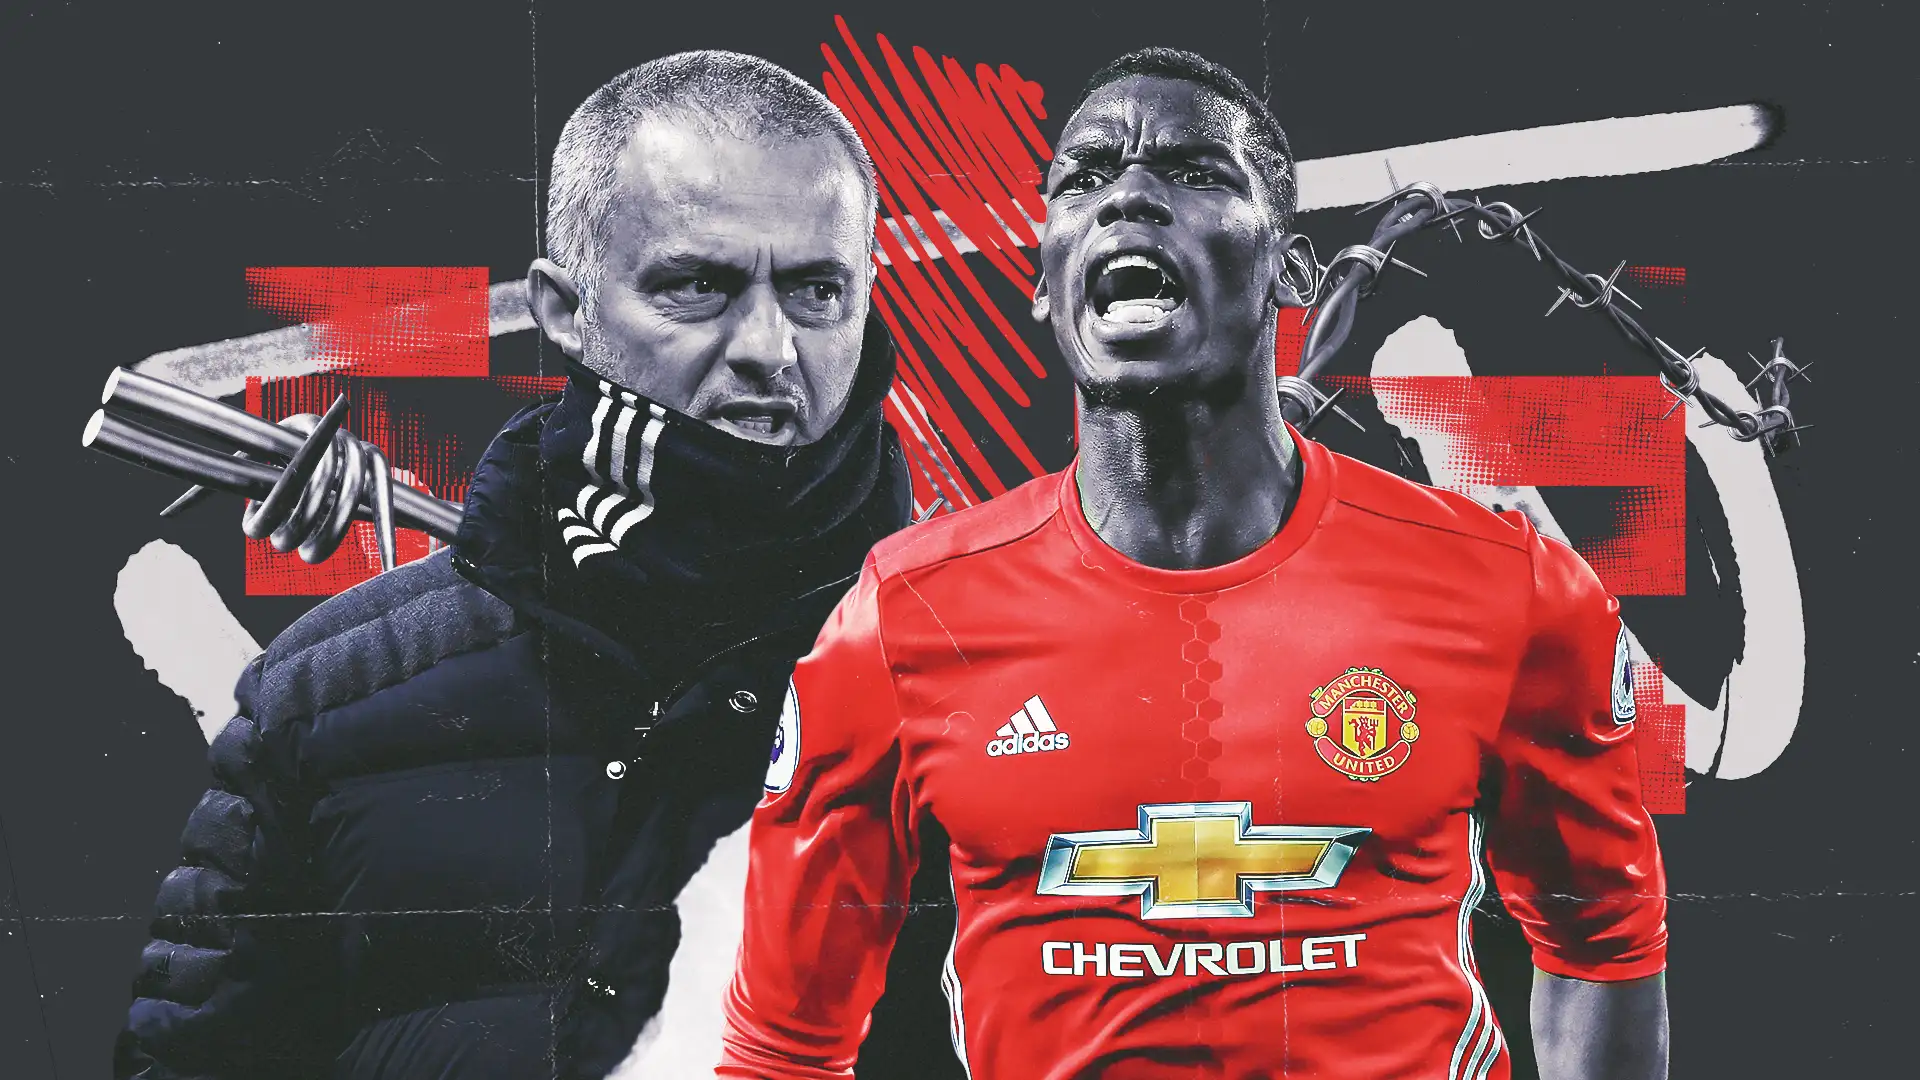 Football's biggest bust-ups: How Jose Mourinho and Paul Pogba went from allies to enemies at Man Utd